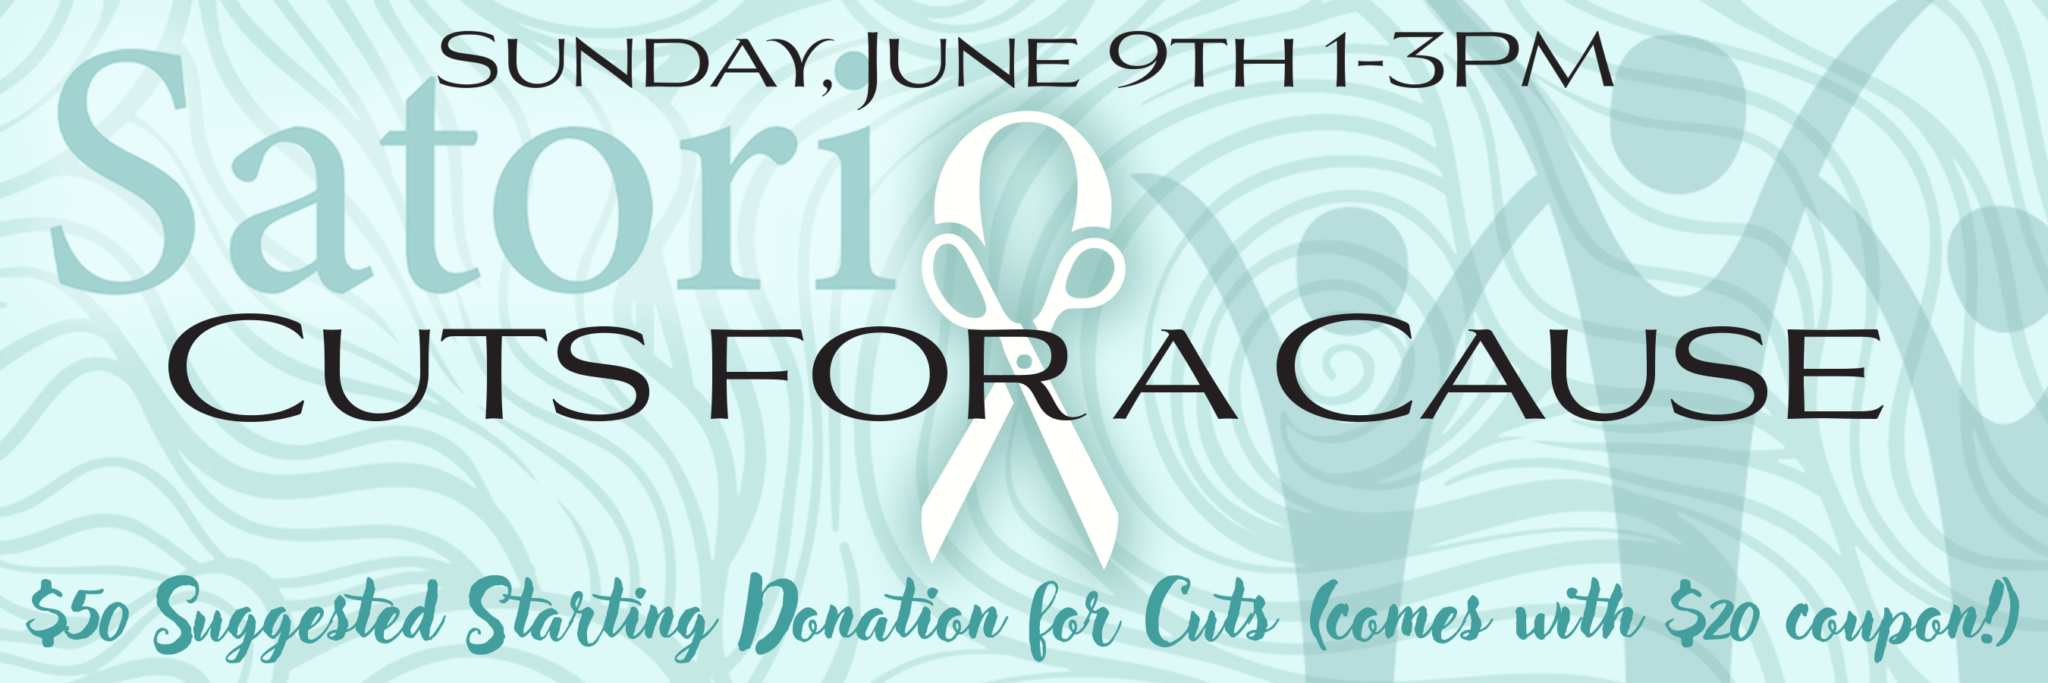 Satori Cuts for a Cause fundraiser is Sunday, June 9th from 1-3PM